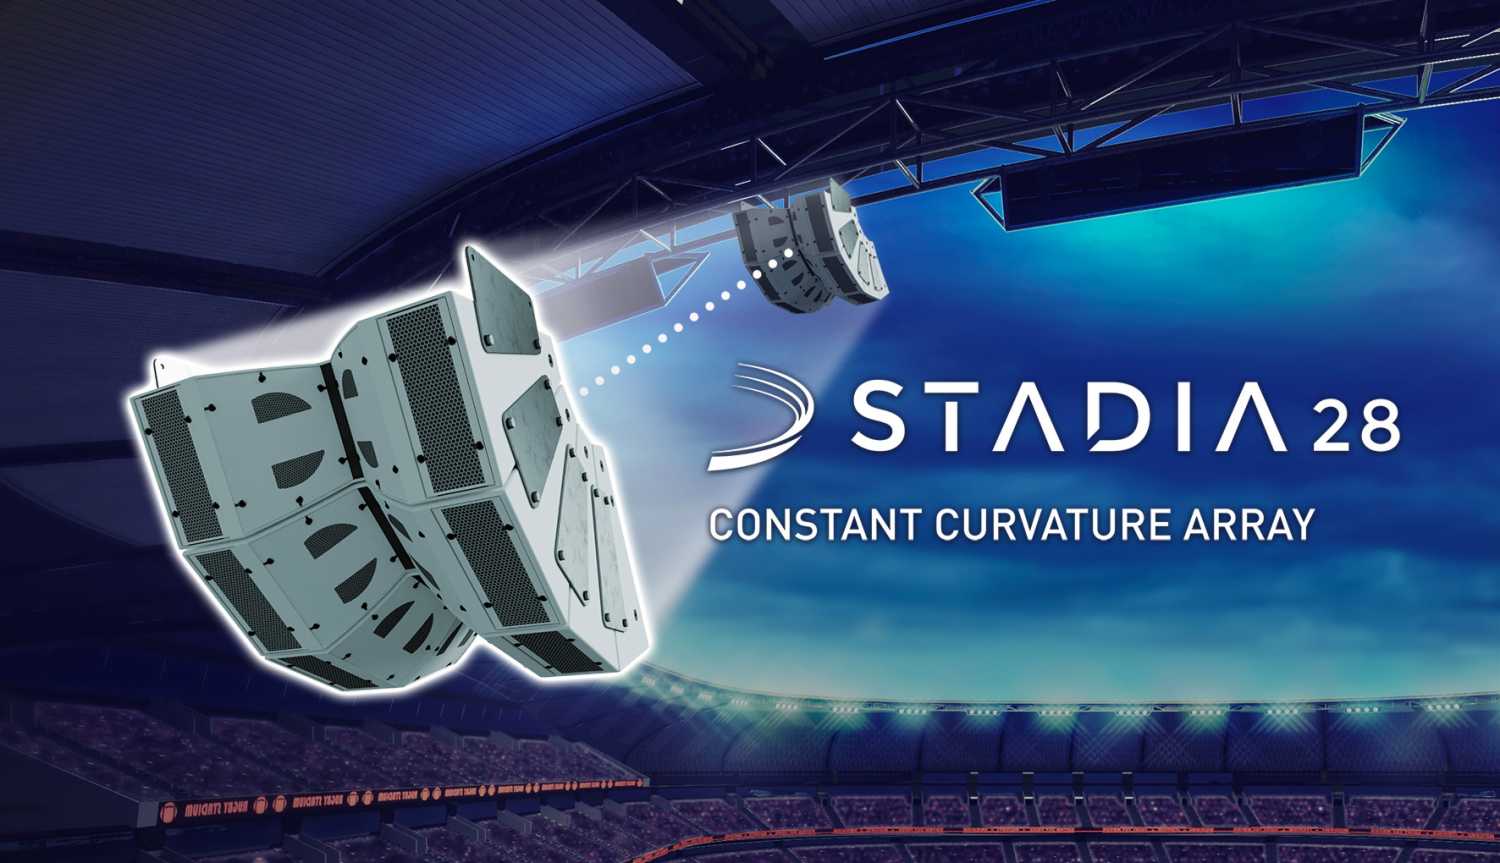 Stadia 28 is the latest addition to the established Stadia family